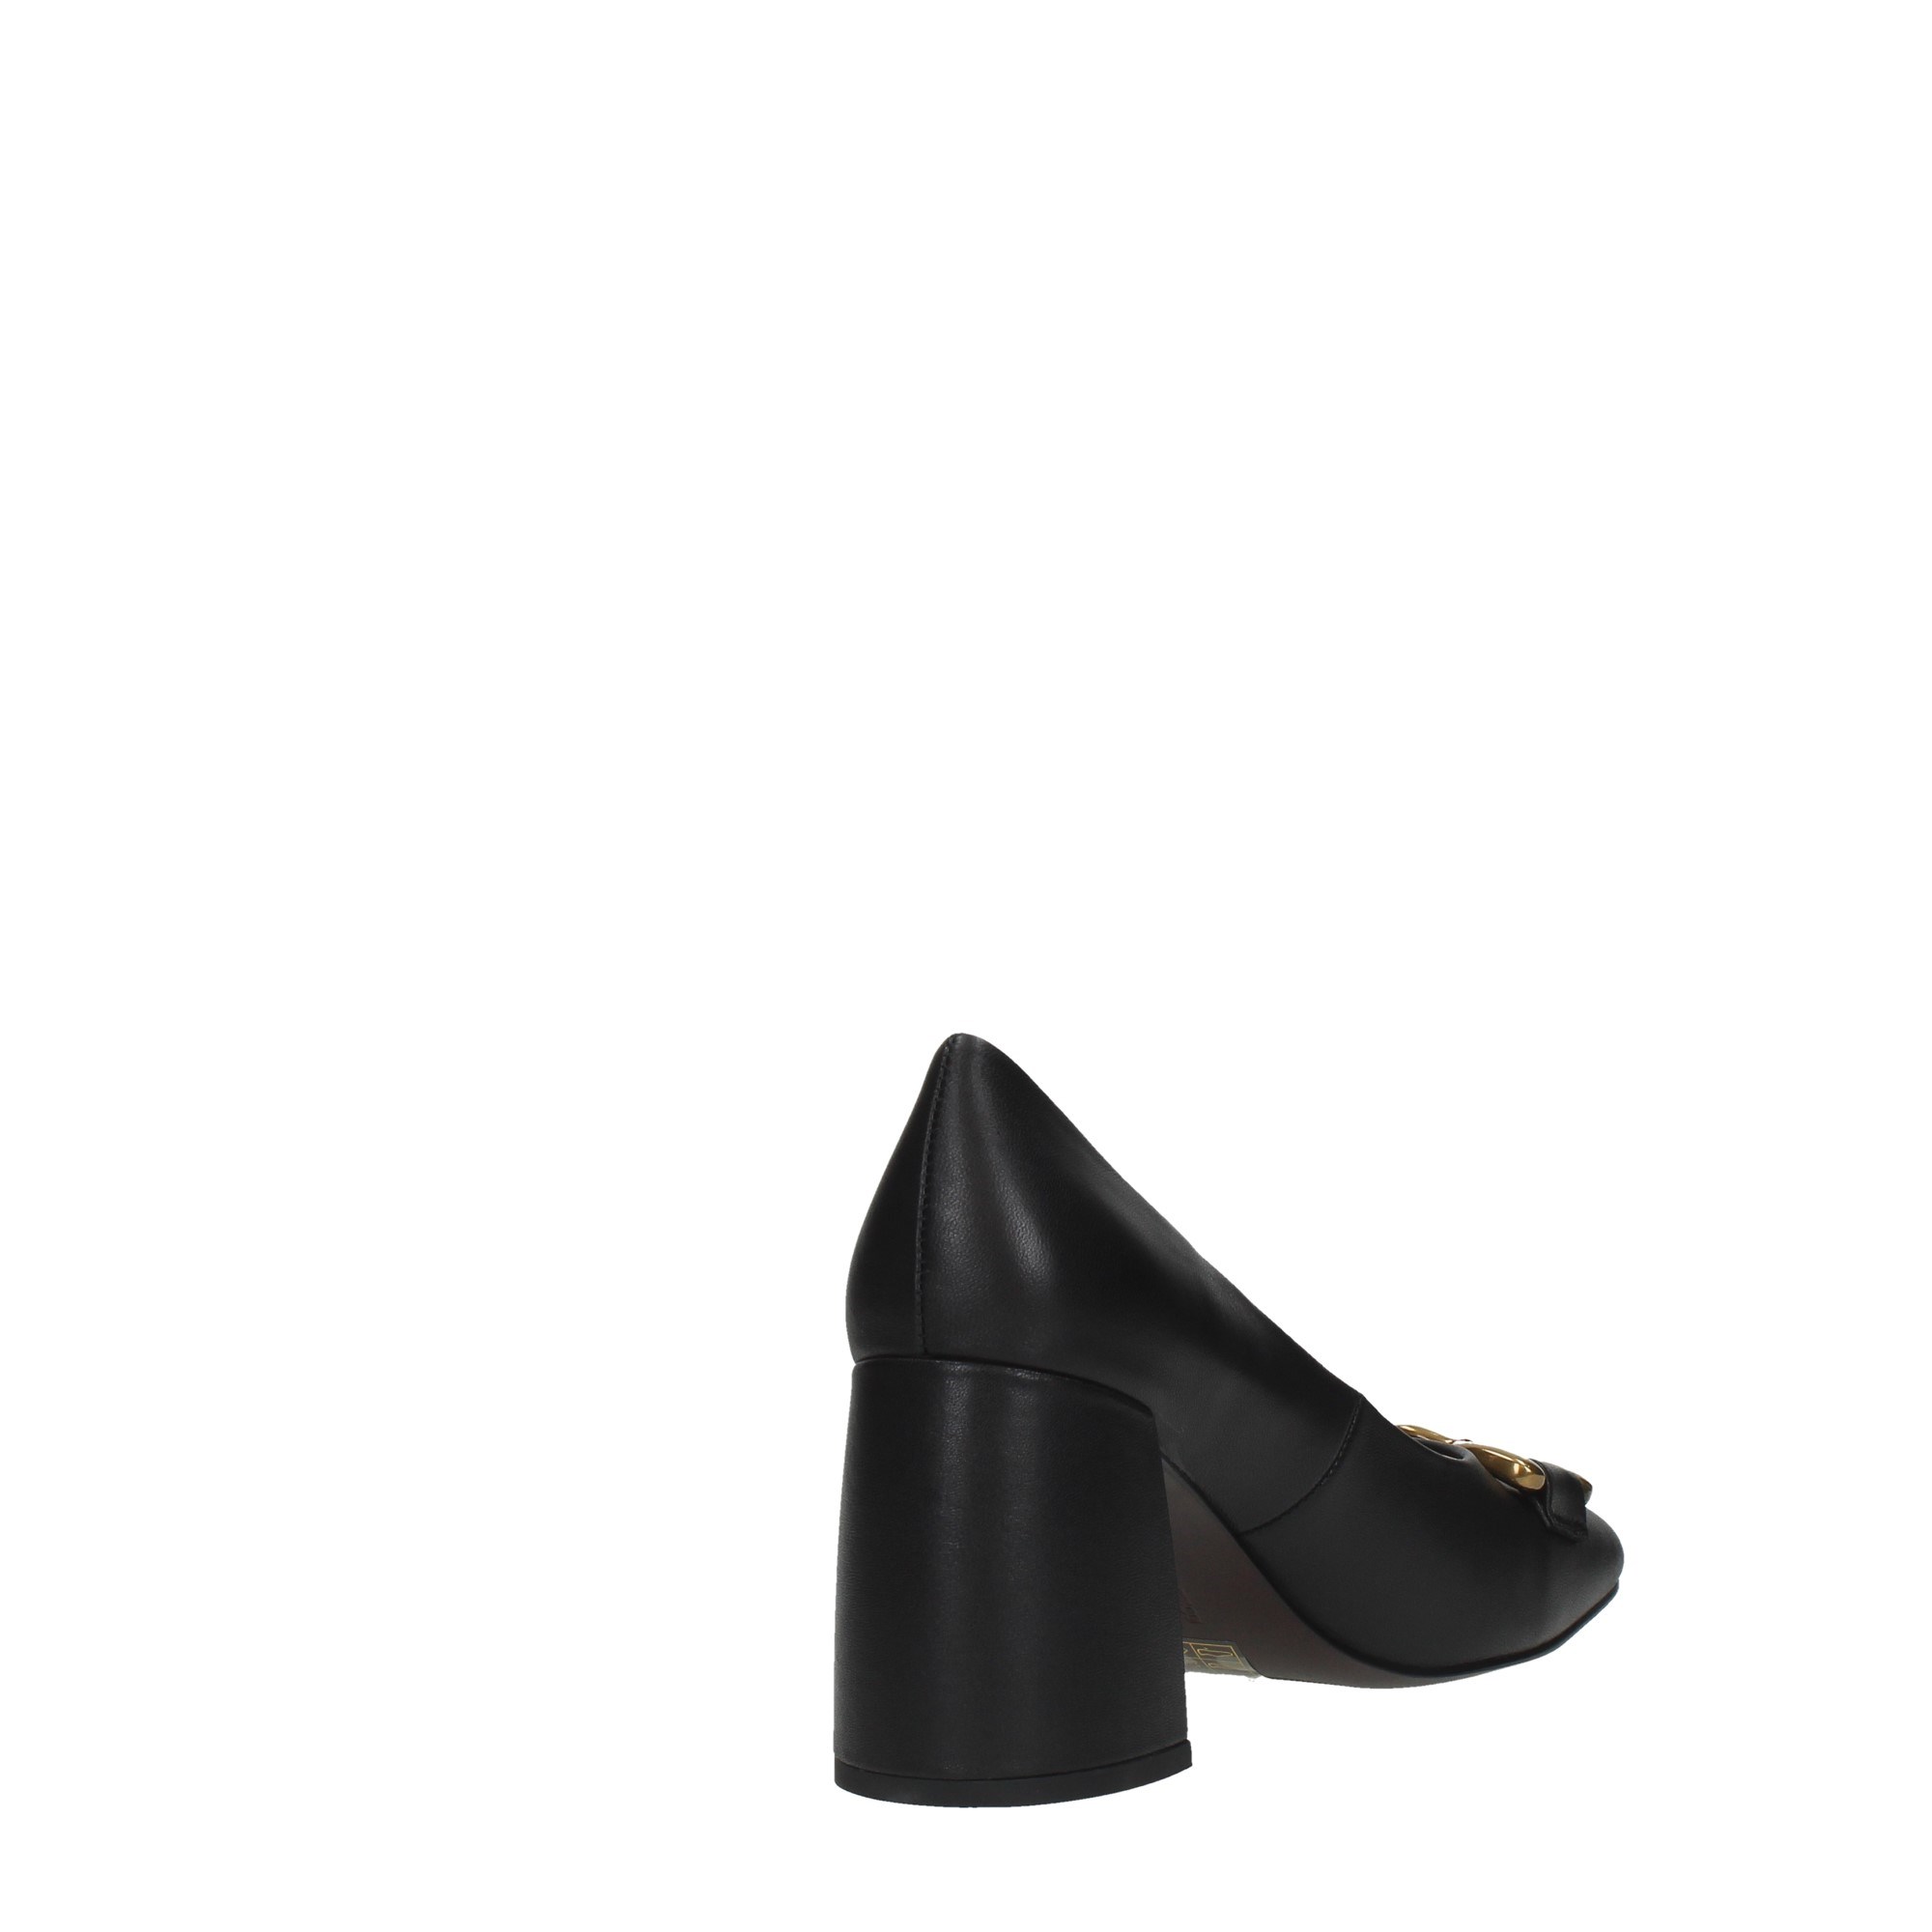 Bibilou Shoes Women Cleavage And Heeled Shoes 574